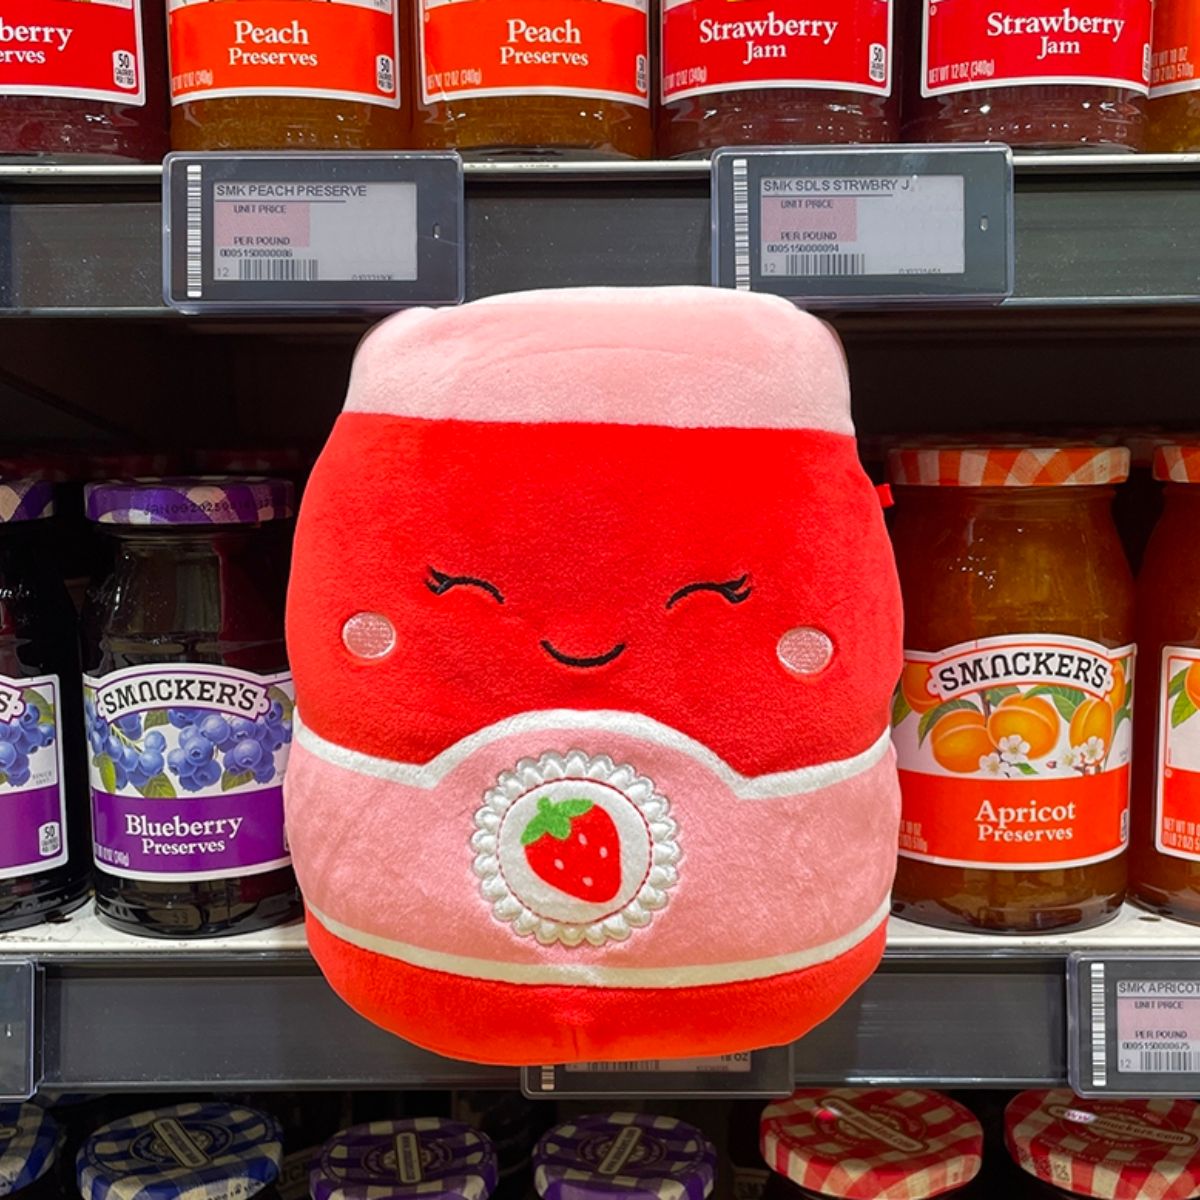 Squishmallow plush that looks like a jar of jam in a jam aisle